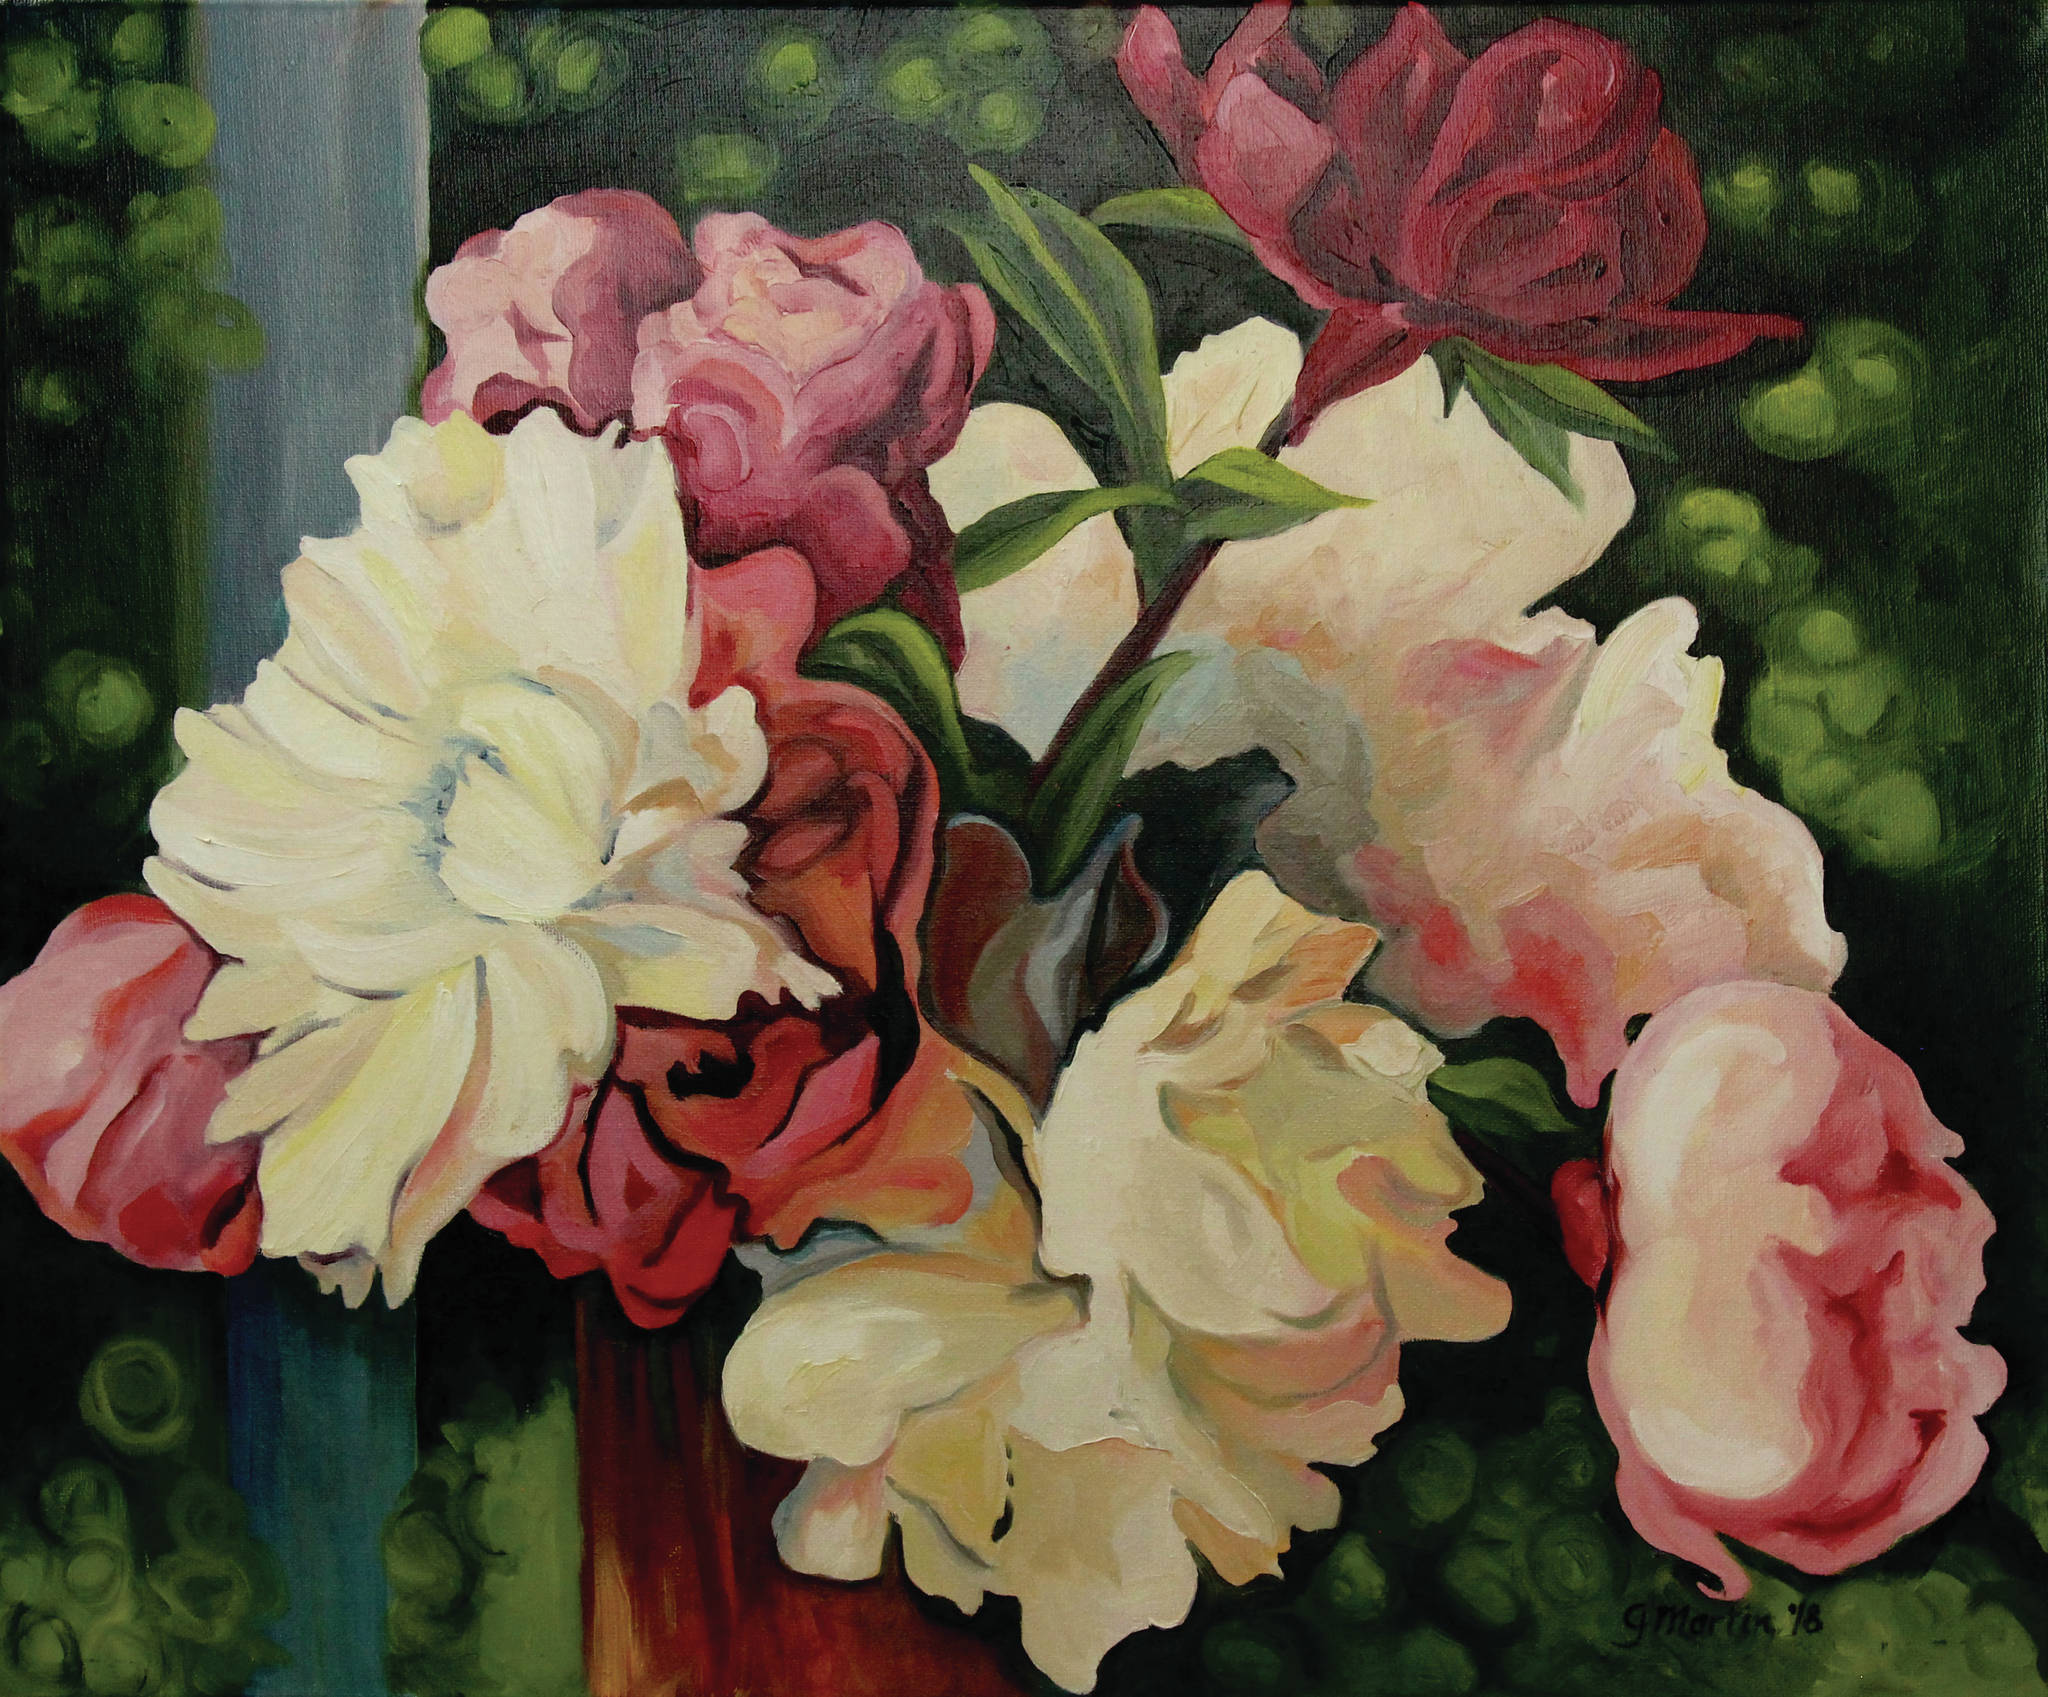 This painting is from Gerri Martin's exhibit, "Peonies: Alaska’s Floral Gems,” opening Friday, July 2, 2021, at Fireweed Gallery in Homer, Alaska. (Photo provided)